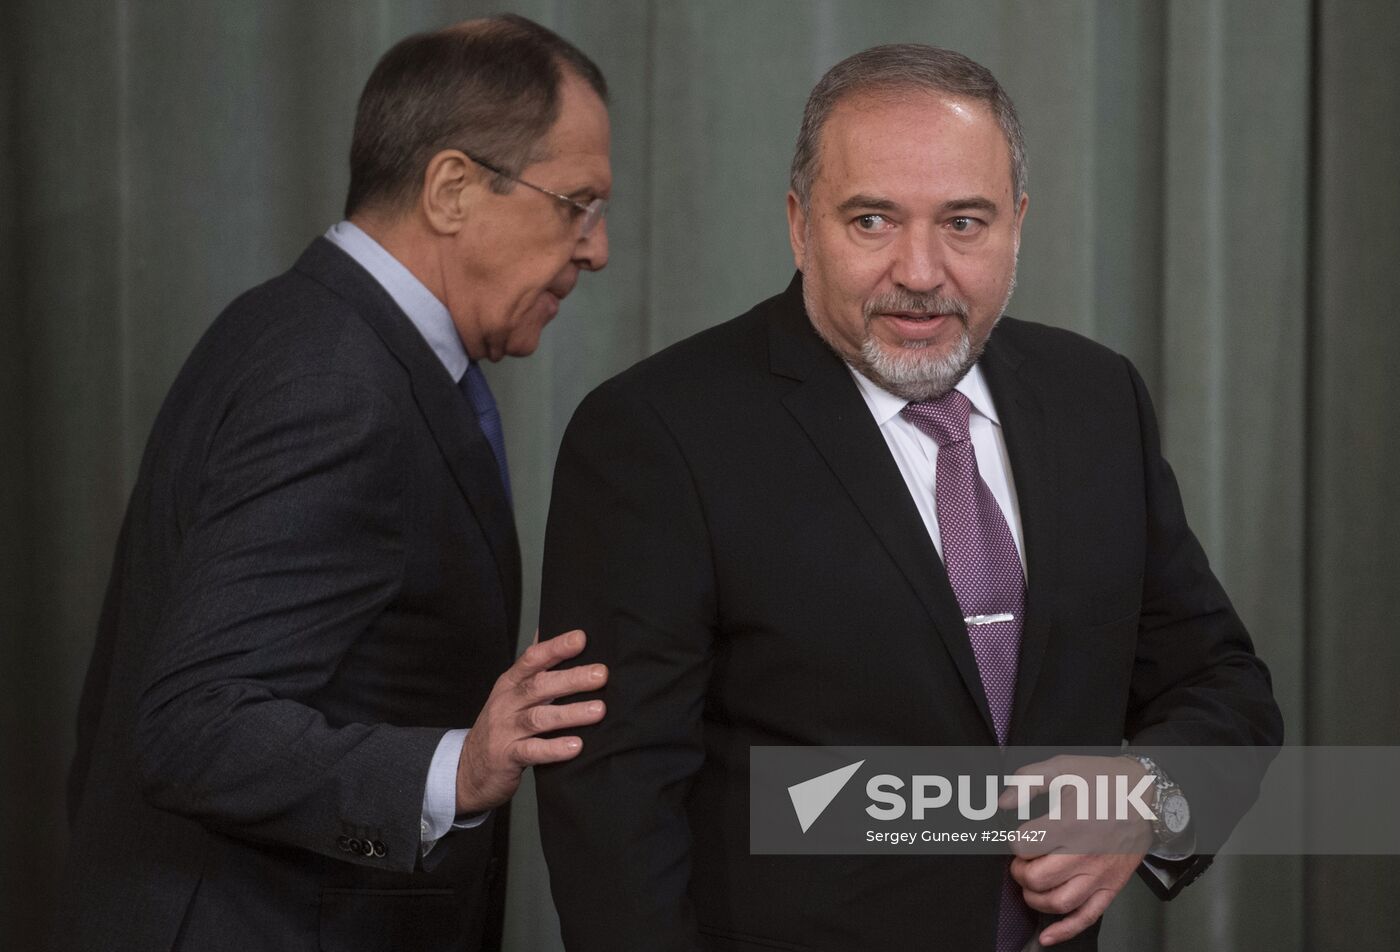 Meeting by Russian and Israeli Foreign Affairs Ministers Sergei Lavrov and Avigdor Lieberman